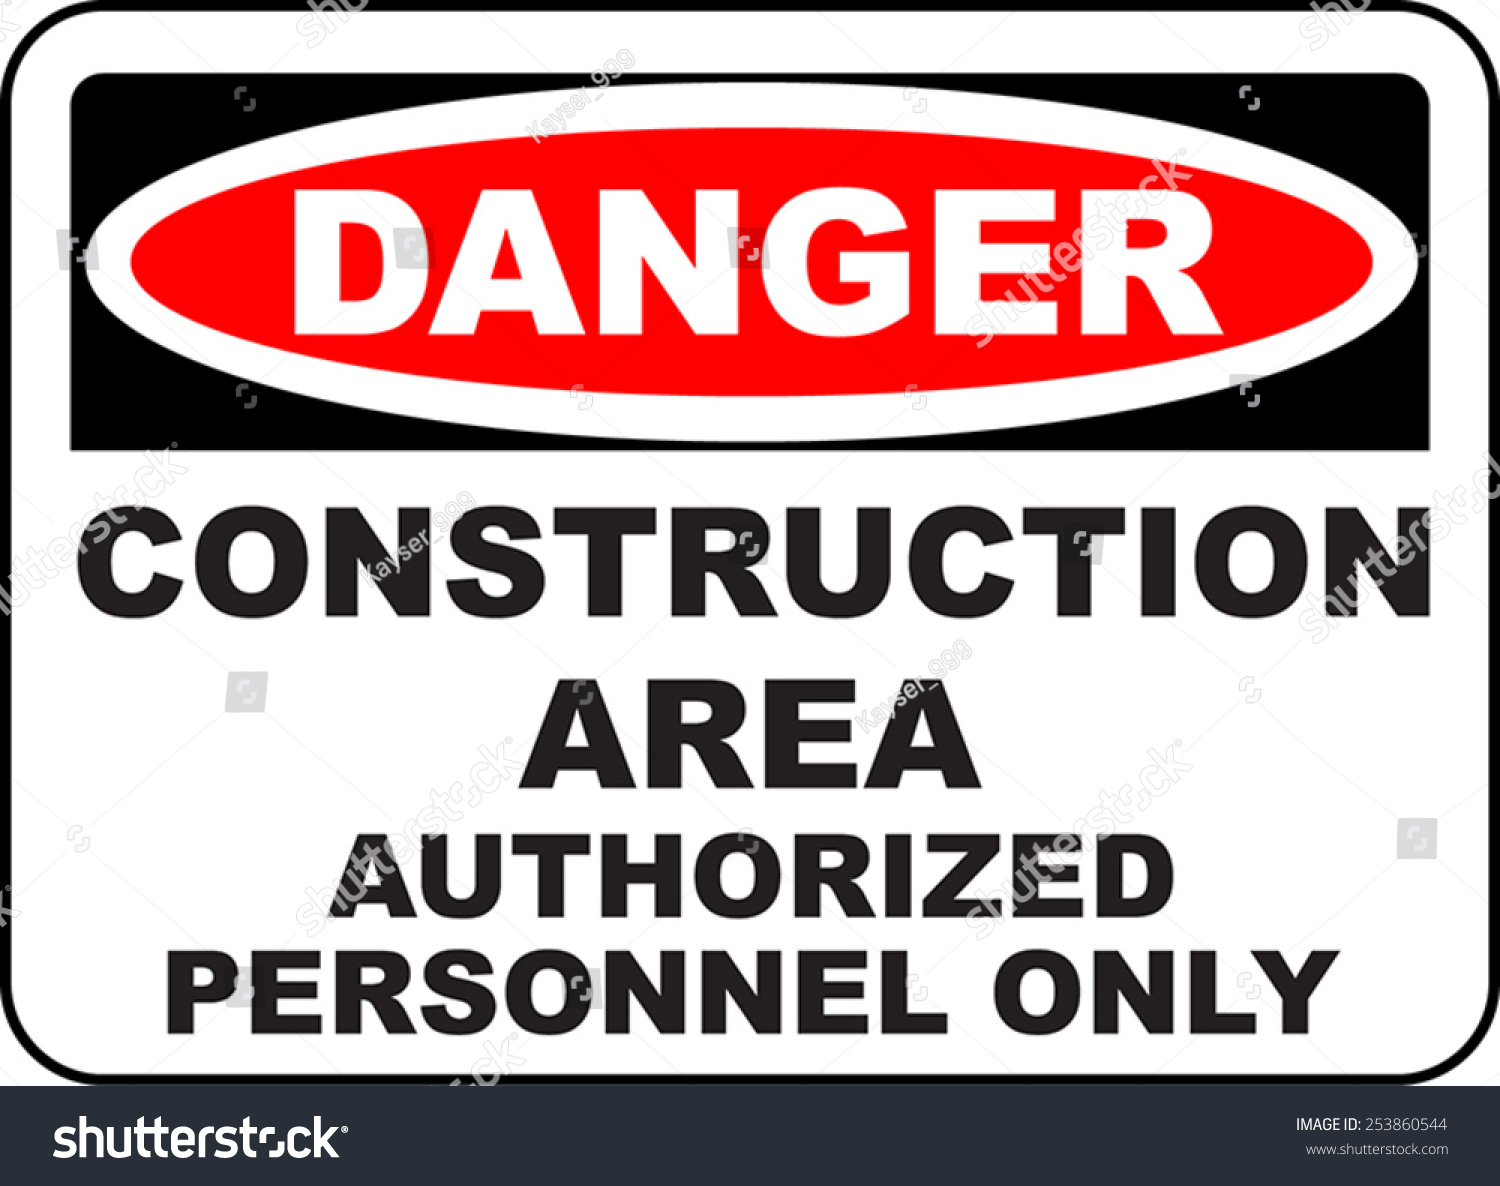 Danger Construction Area Authorized Personnel Only Stock Vector ...